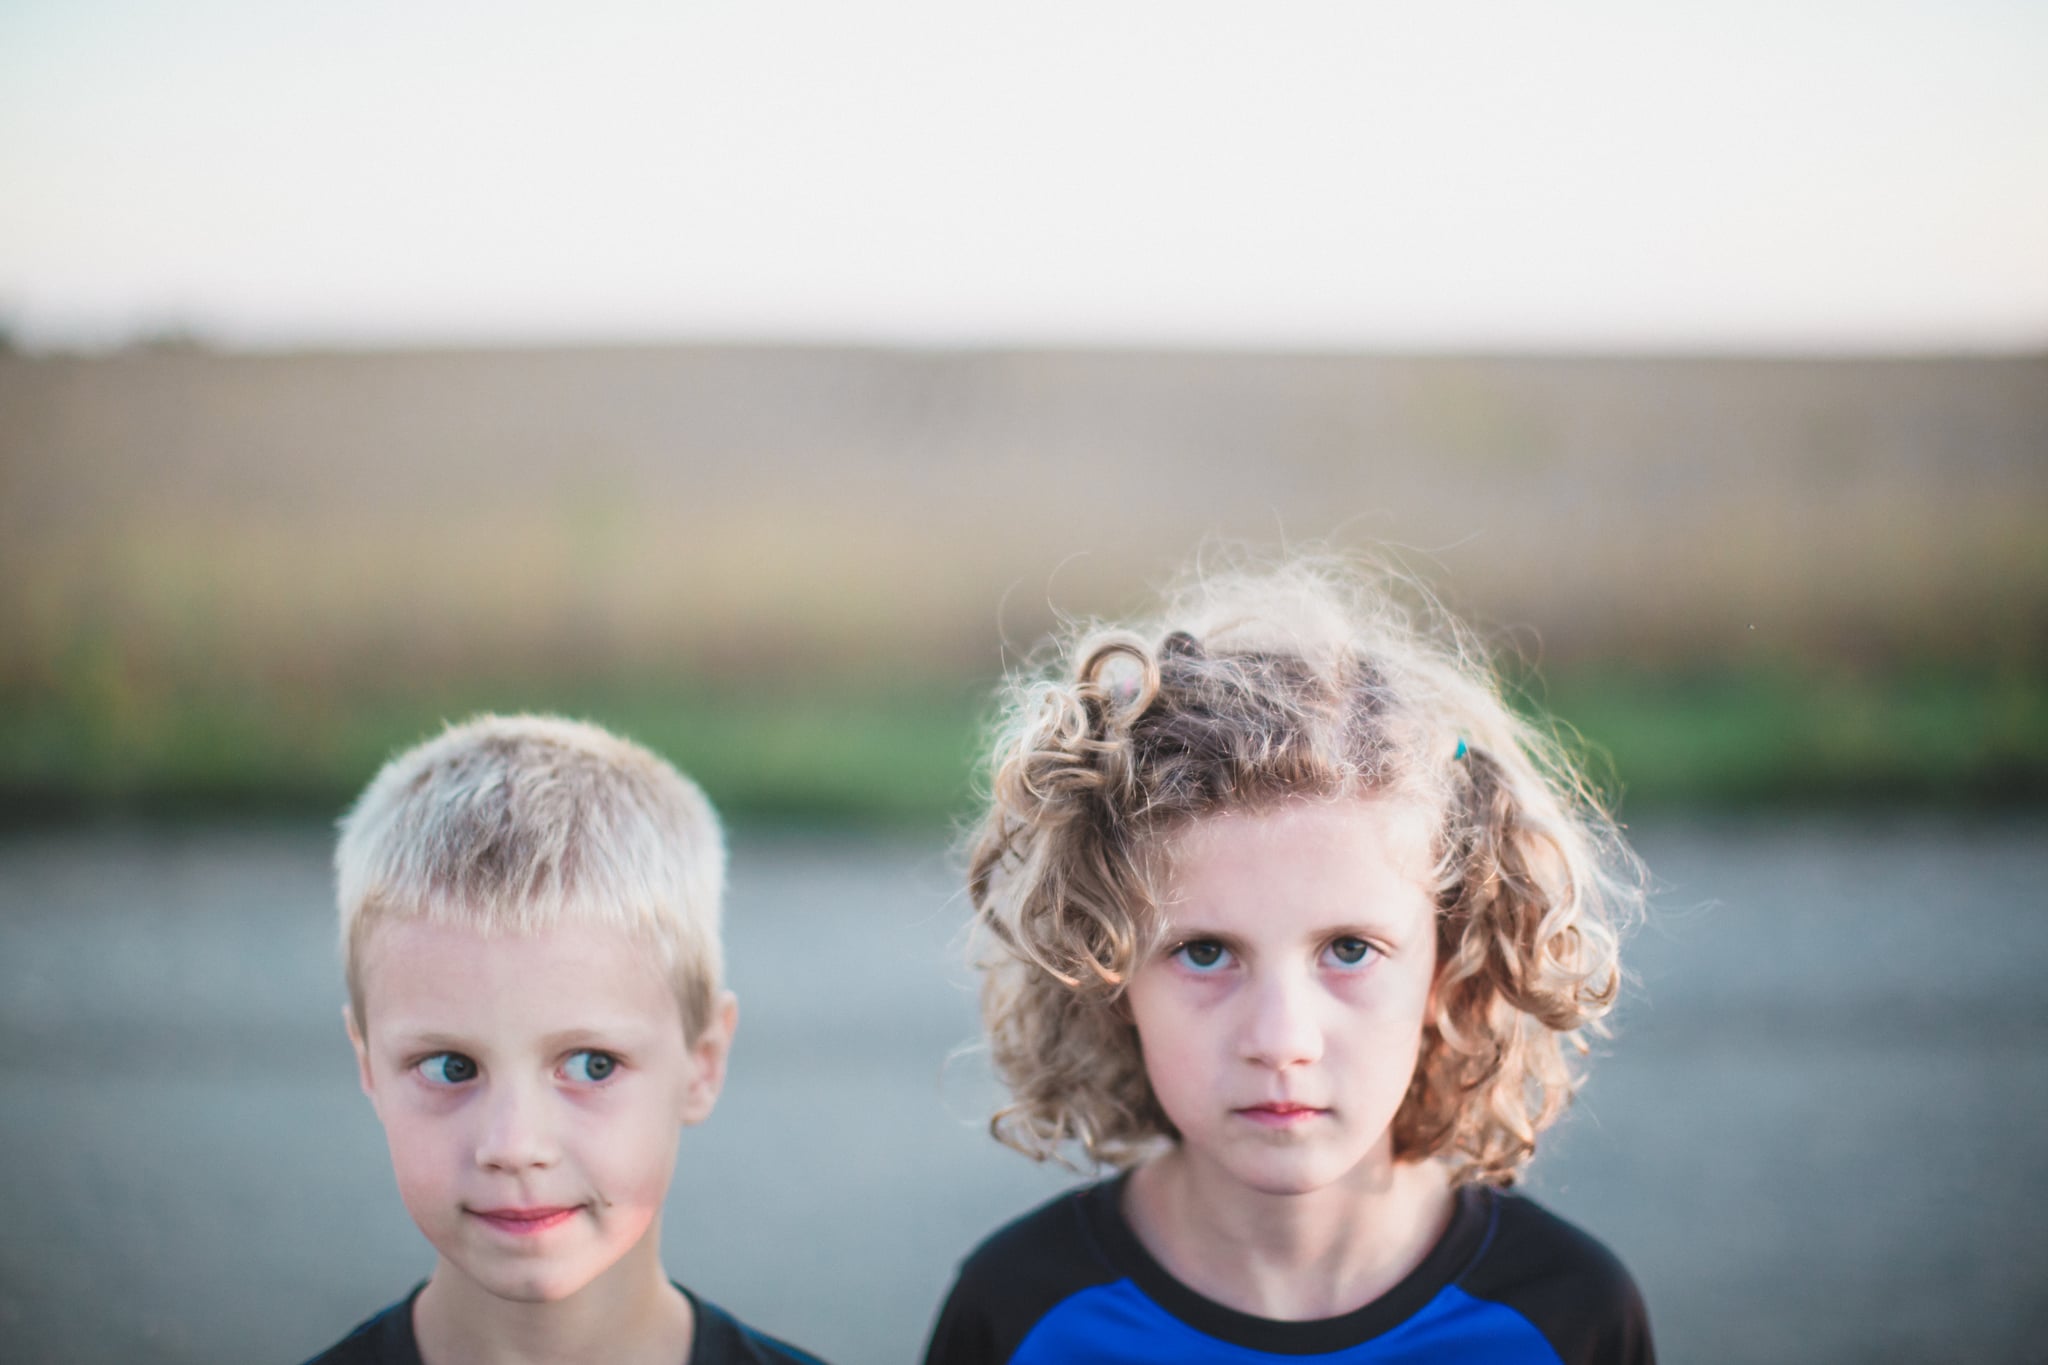 Close up portrait of a boy and girl standing side by side. Girl with curly hair looks sternly into the camera while blond boy looks at her with side eyes and a mischievous expression.